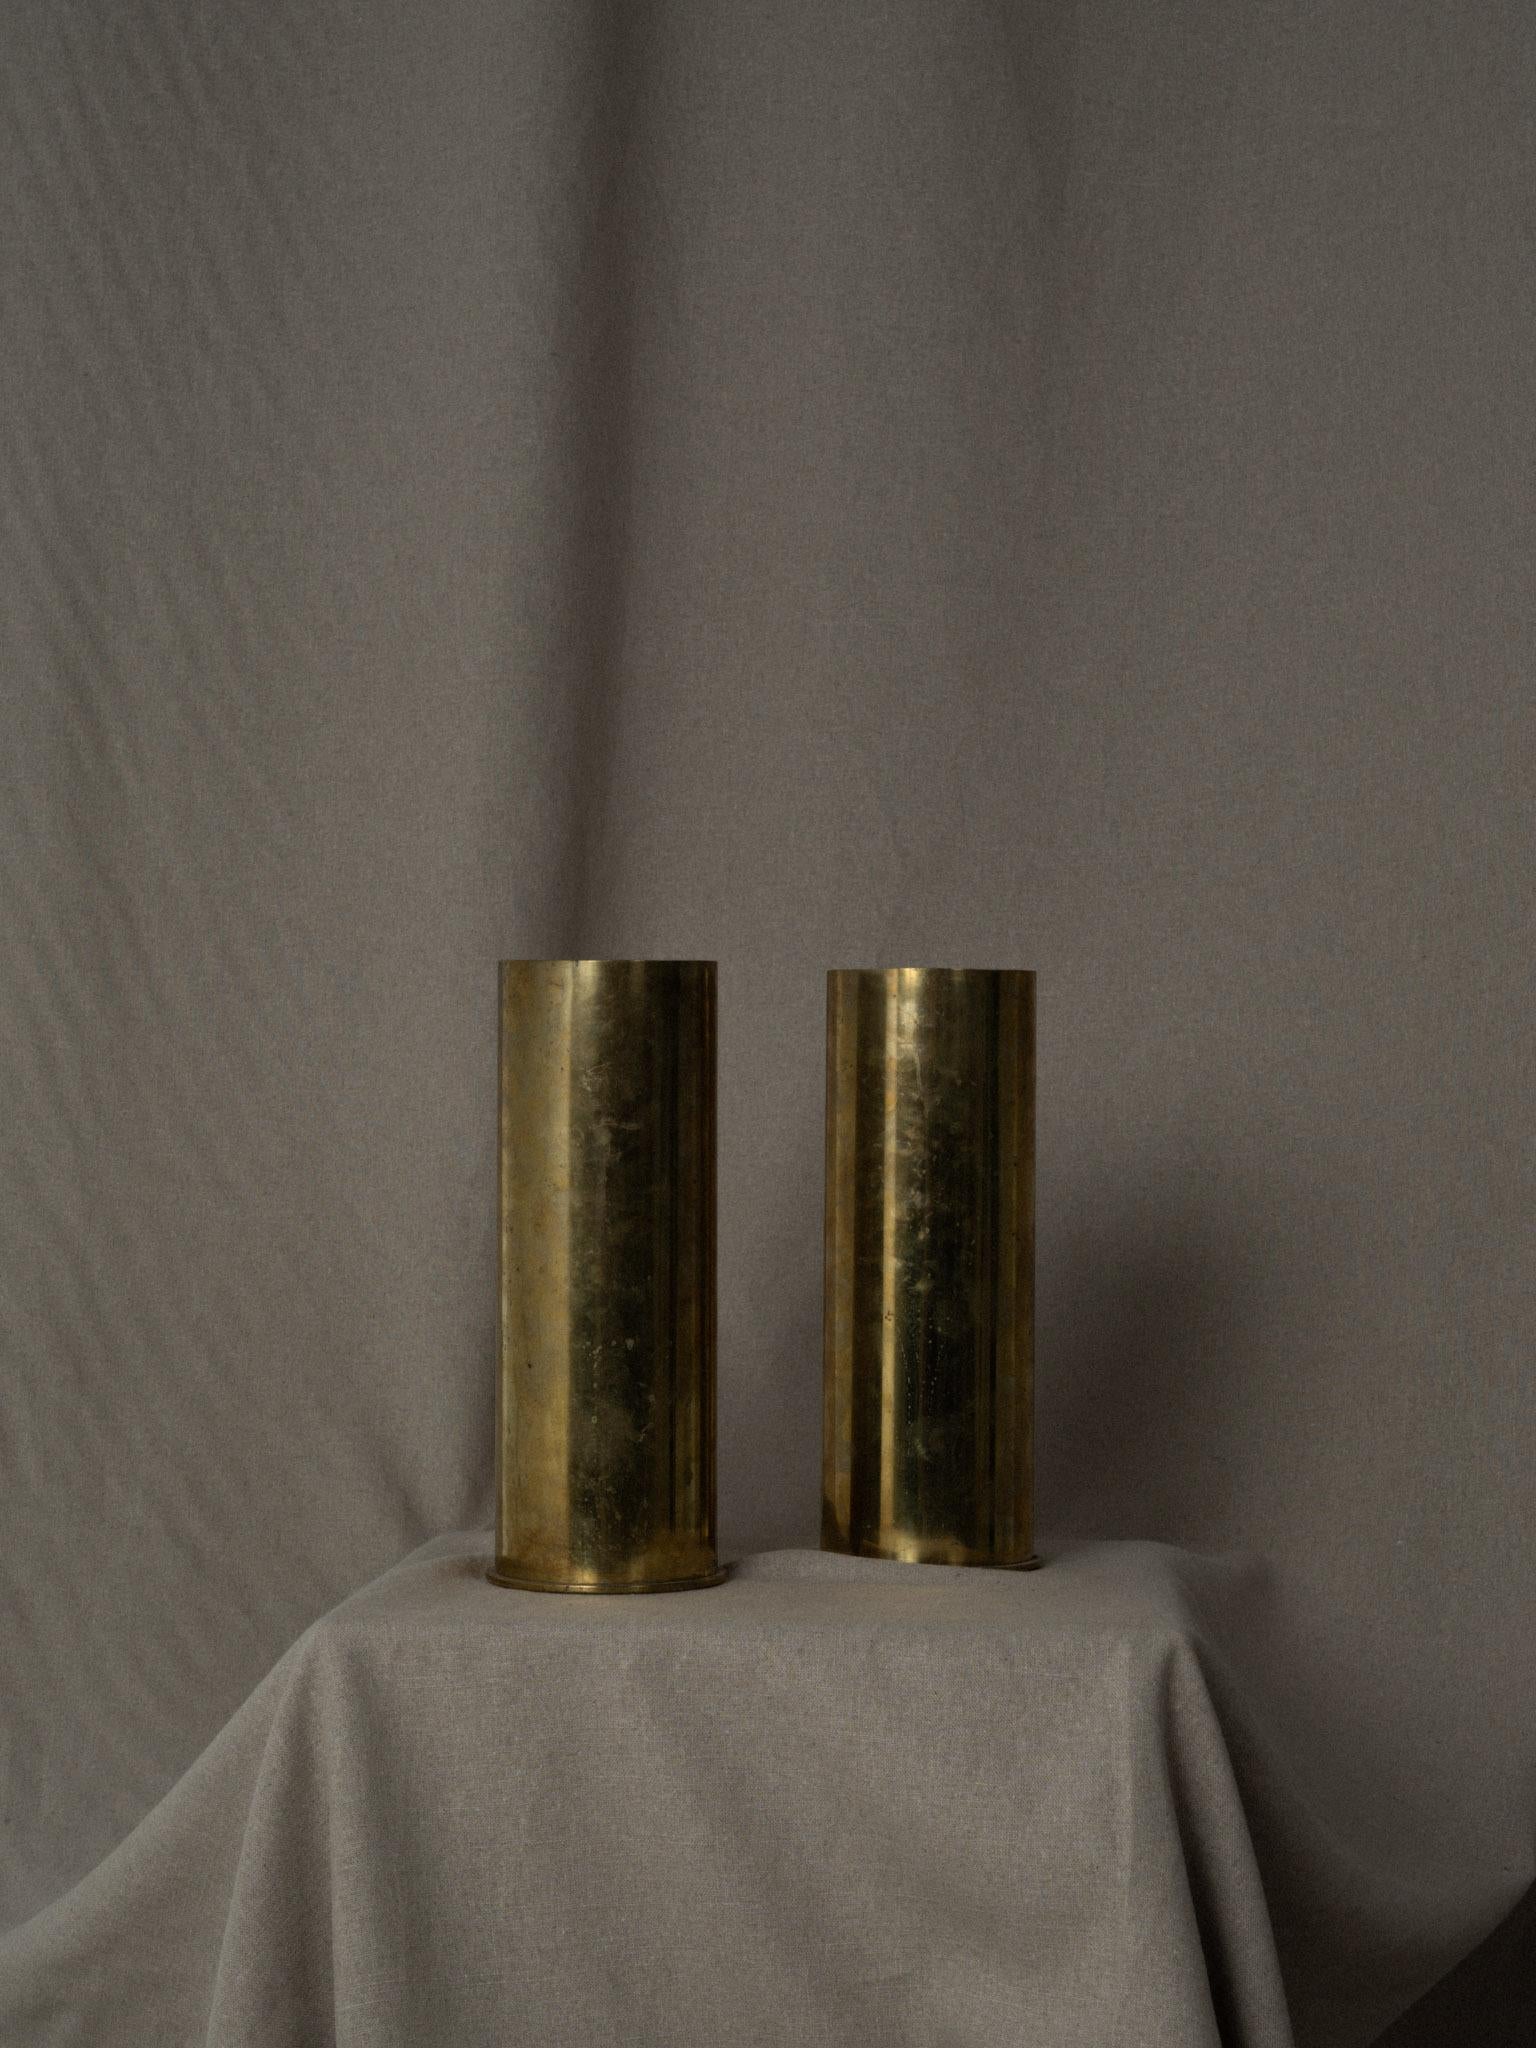 Pair of antique brass artillery shell casings from World War II. Made out of brass, these impressive heavy pieces of artillery are round in shape and dated on the bottom (1944). These memorabilia are in excellent condition with a rich patinated